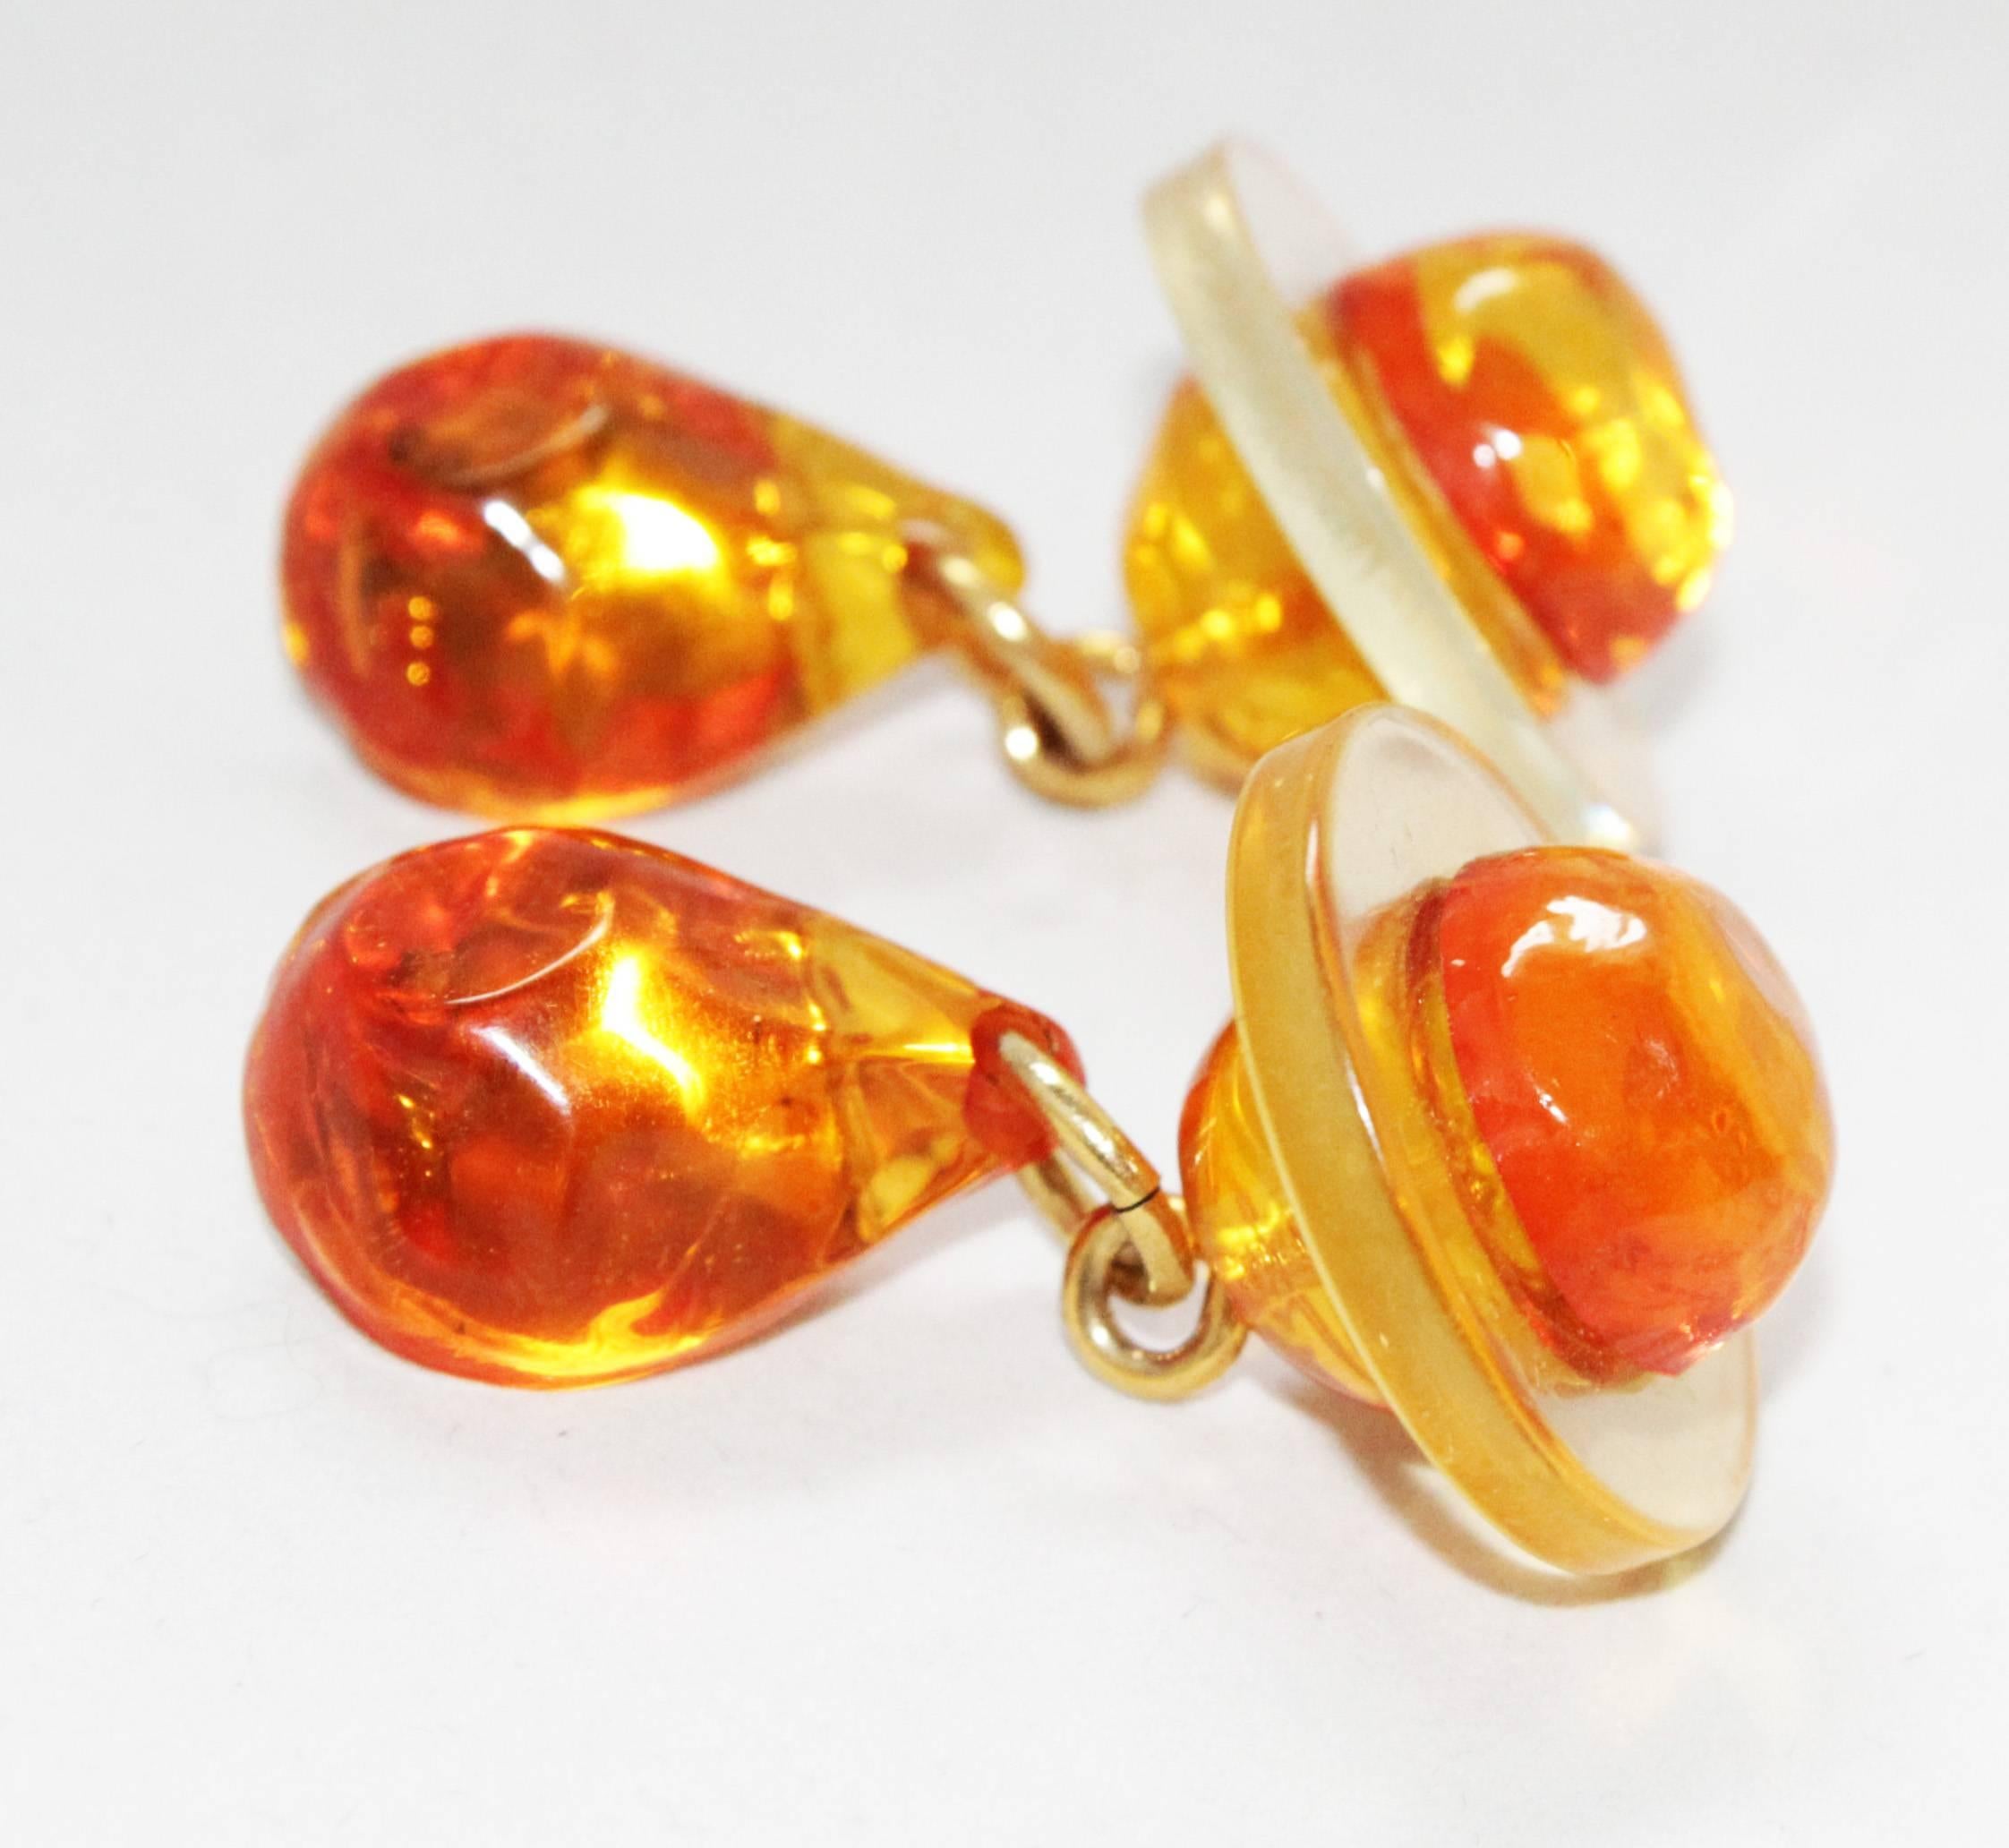 Space Capsule french 80s earrings, made of orange/amber resin. Great & unique design. 

Marked: Marc Labat

Size : 6 x 2 cm - 2.4 x 0.8 in.

Excellent vintage condition.